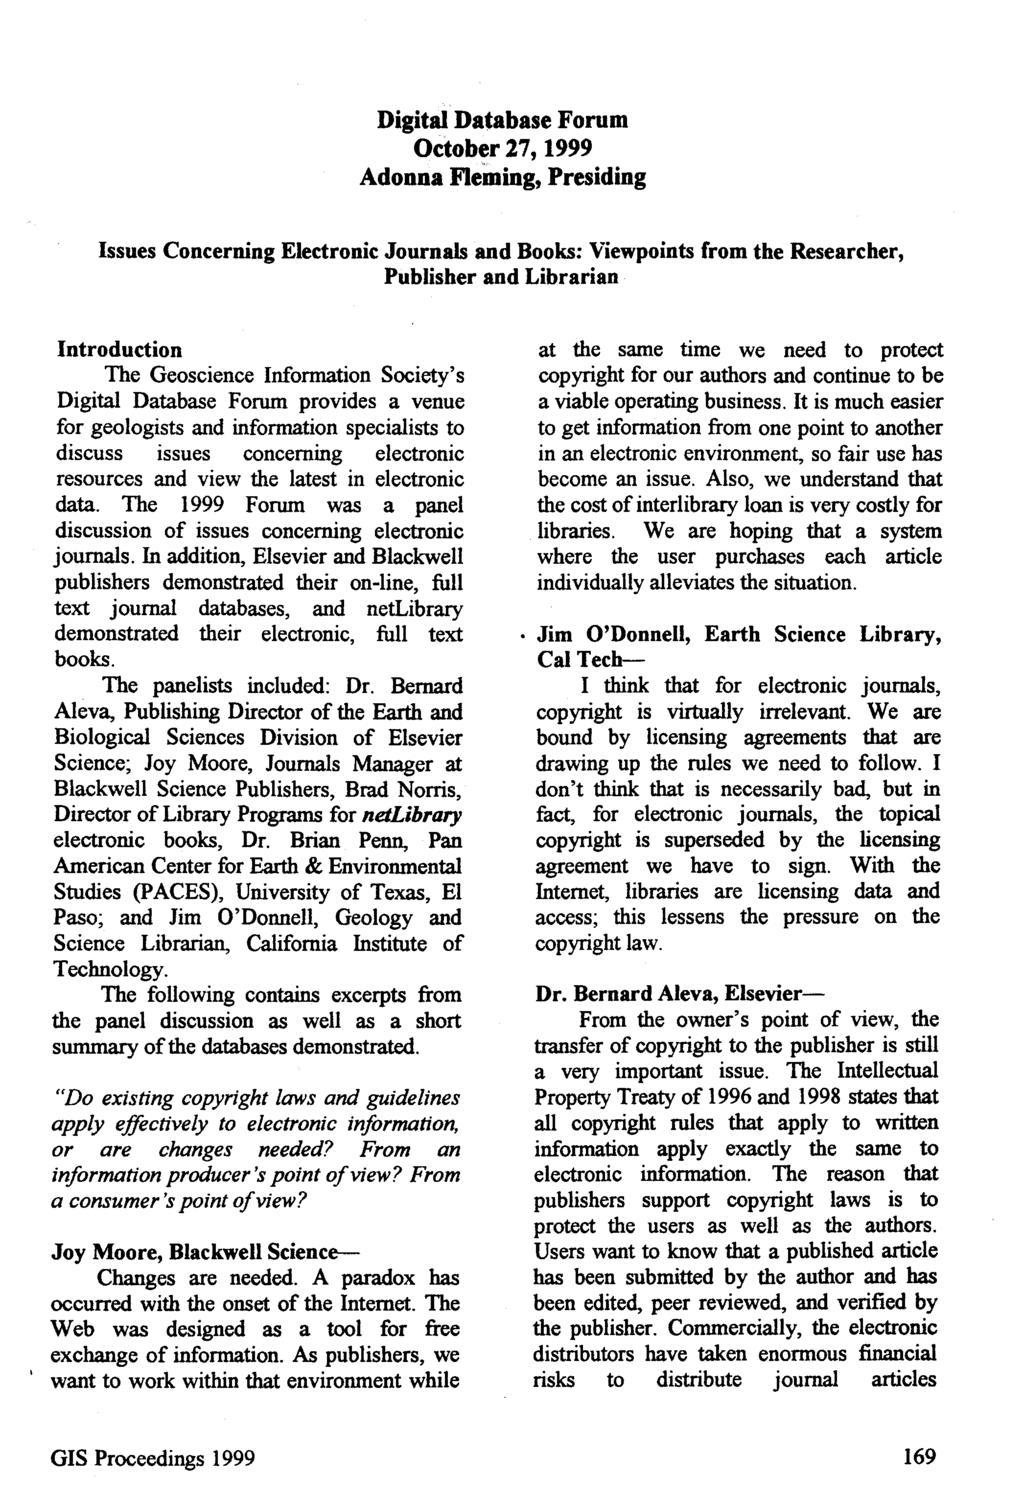 Digital Database Forum October 27,1999 Adonna Fleming, Presiding Issues Concerning Electronic Journals and Books: Viewpoints from the Researcher, Publisher and Librarian Introduction The Geoscience